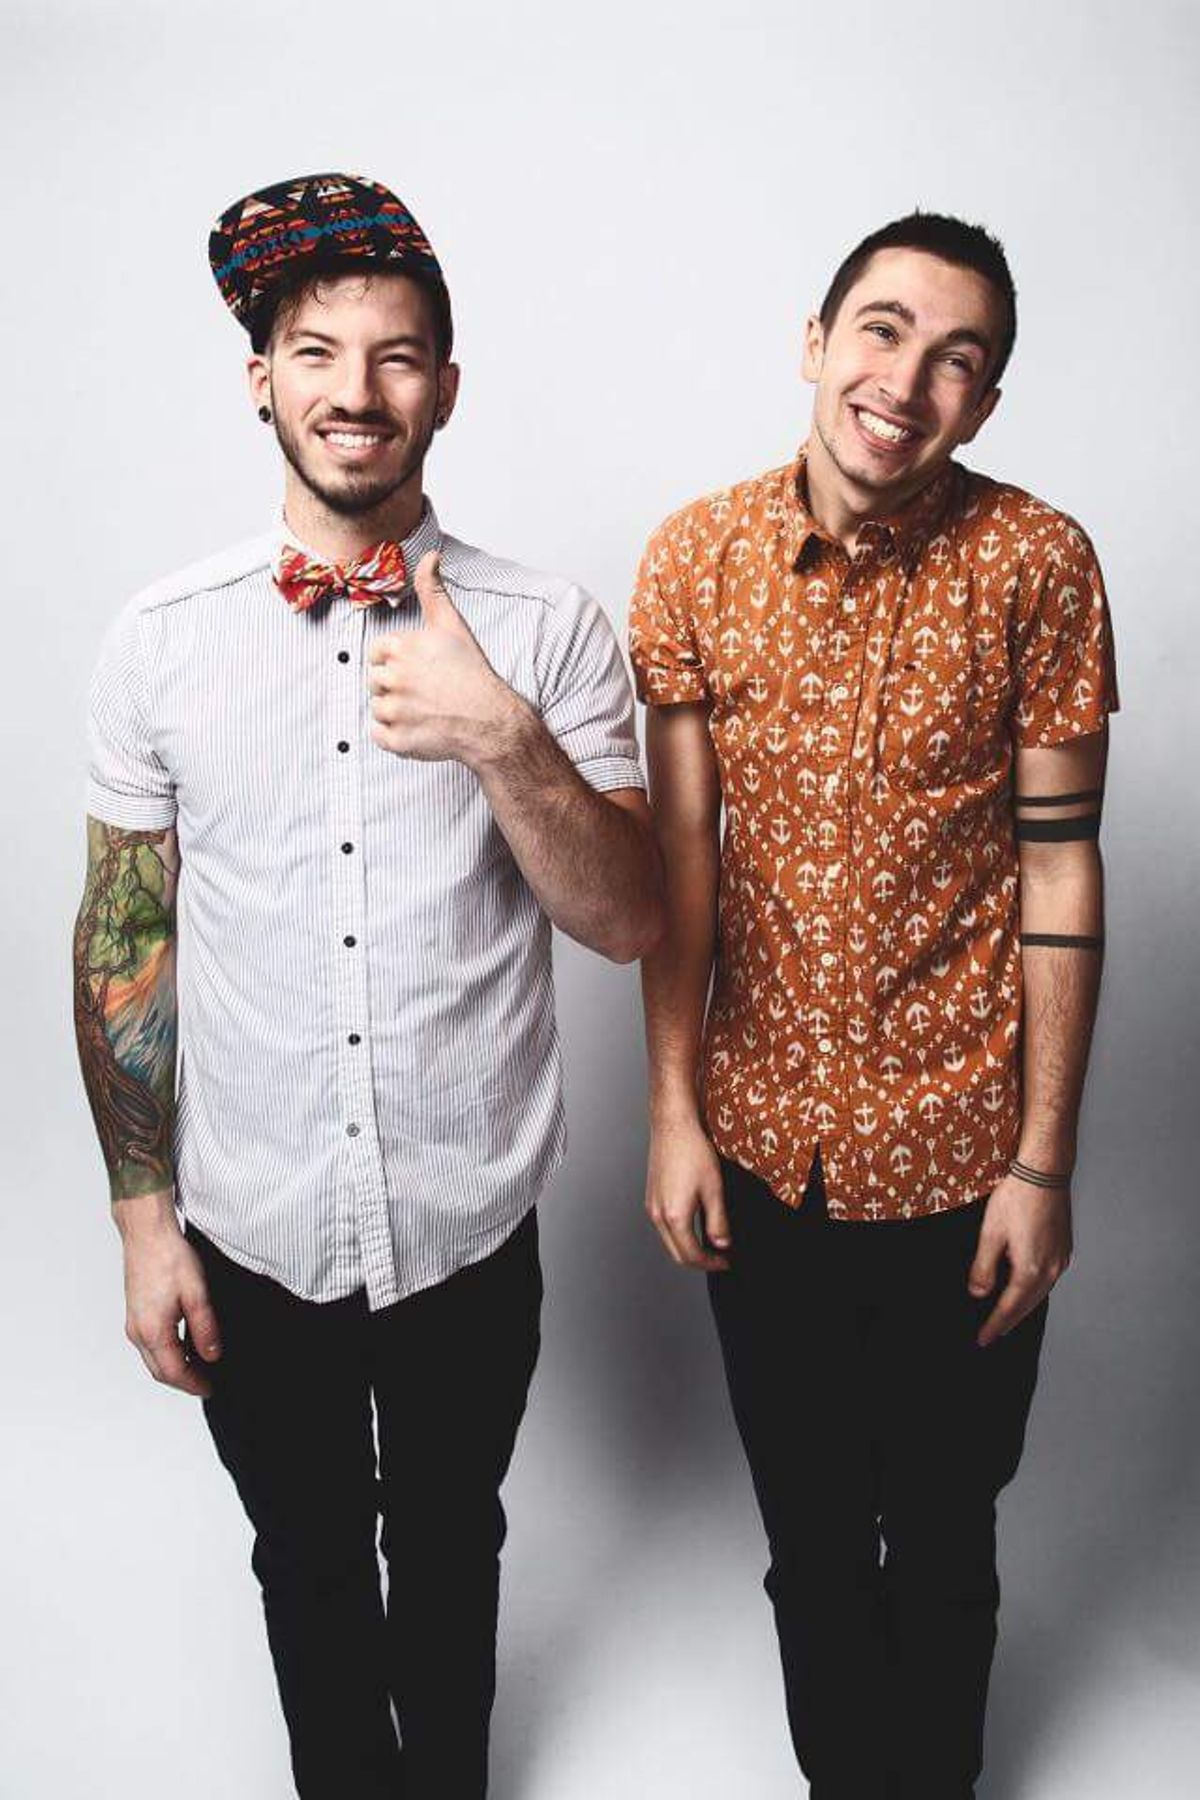 Twenty One Pilots: The Band That Saved My Life